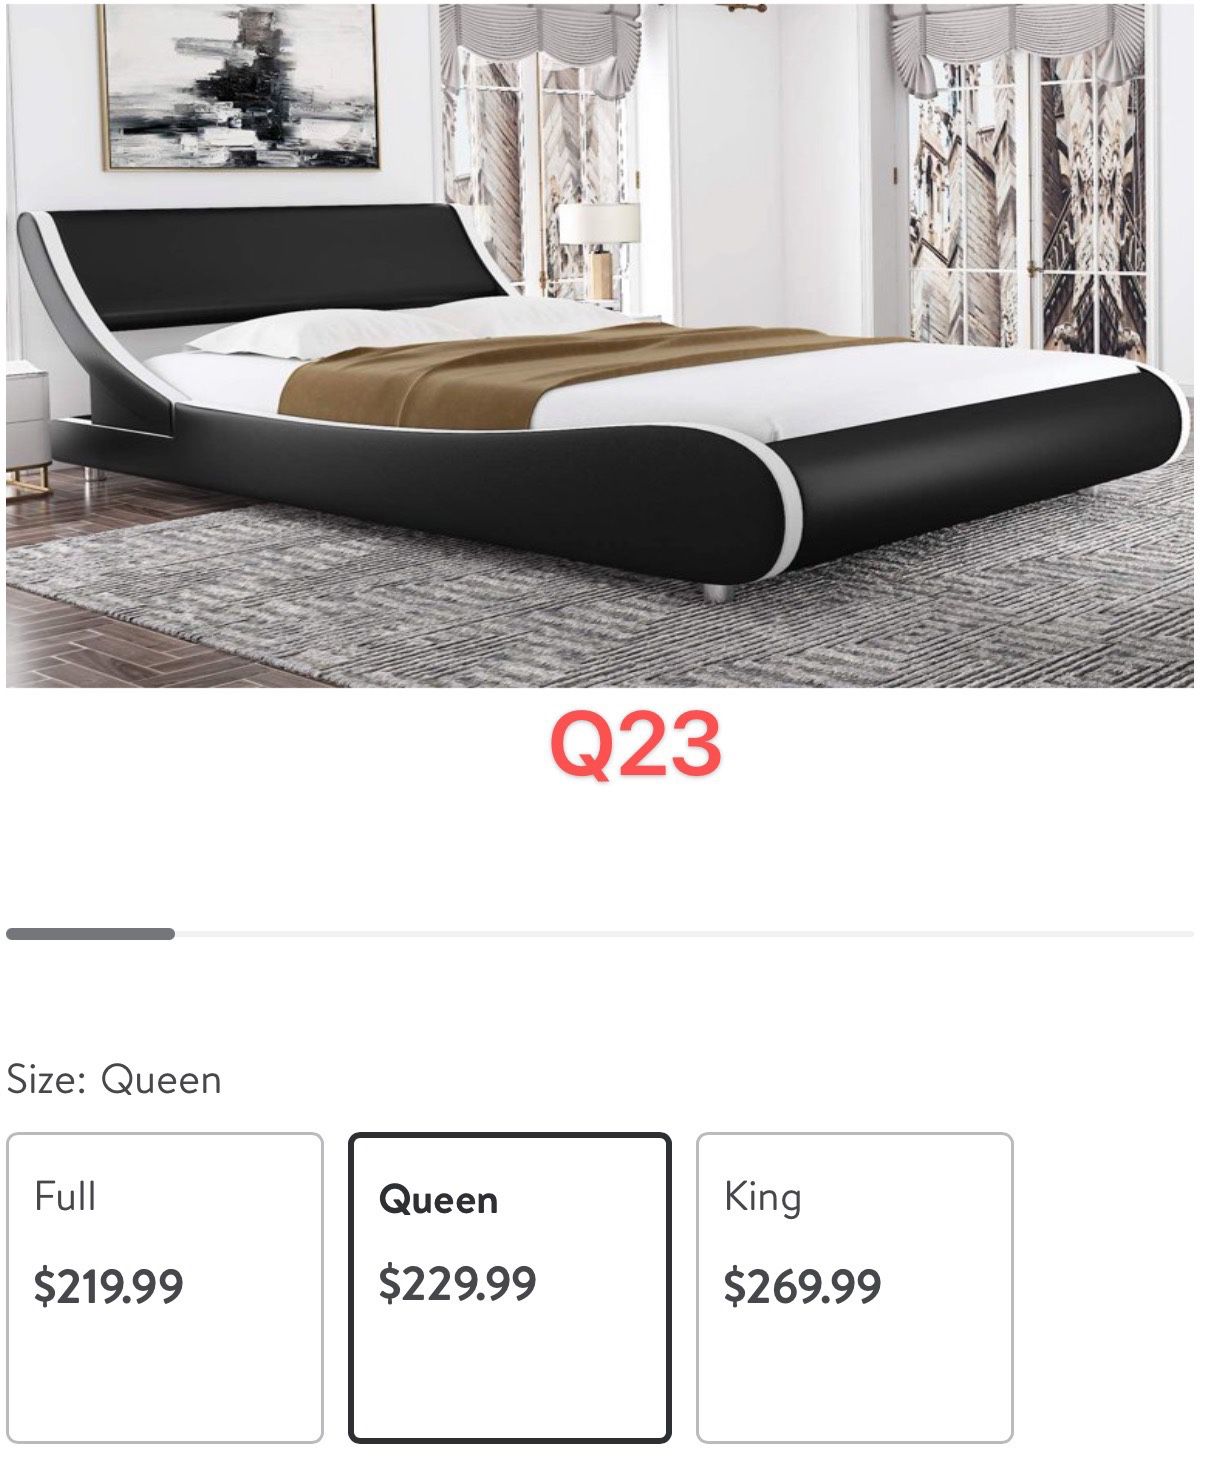 Q23 Queen Size Modern Platform Bed Frame with Adjustable Headboard, Faux Leather, Black with White Border